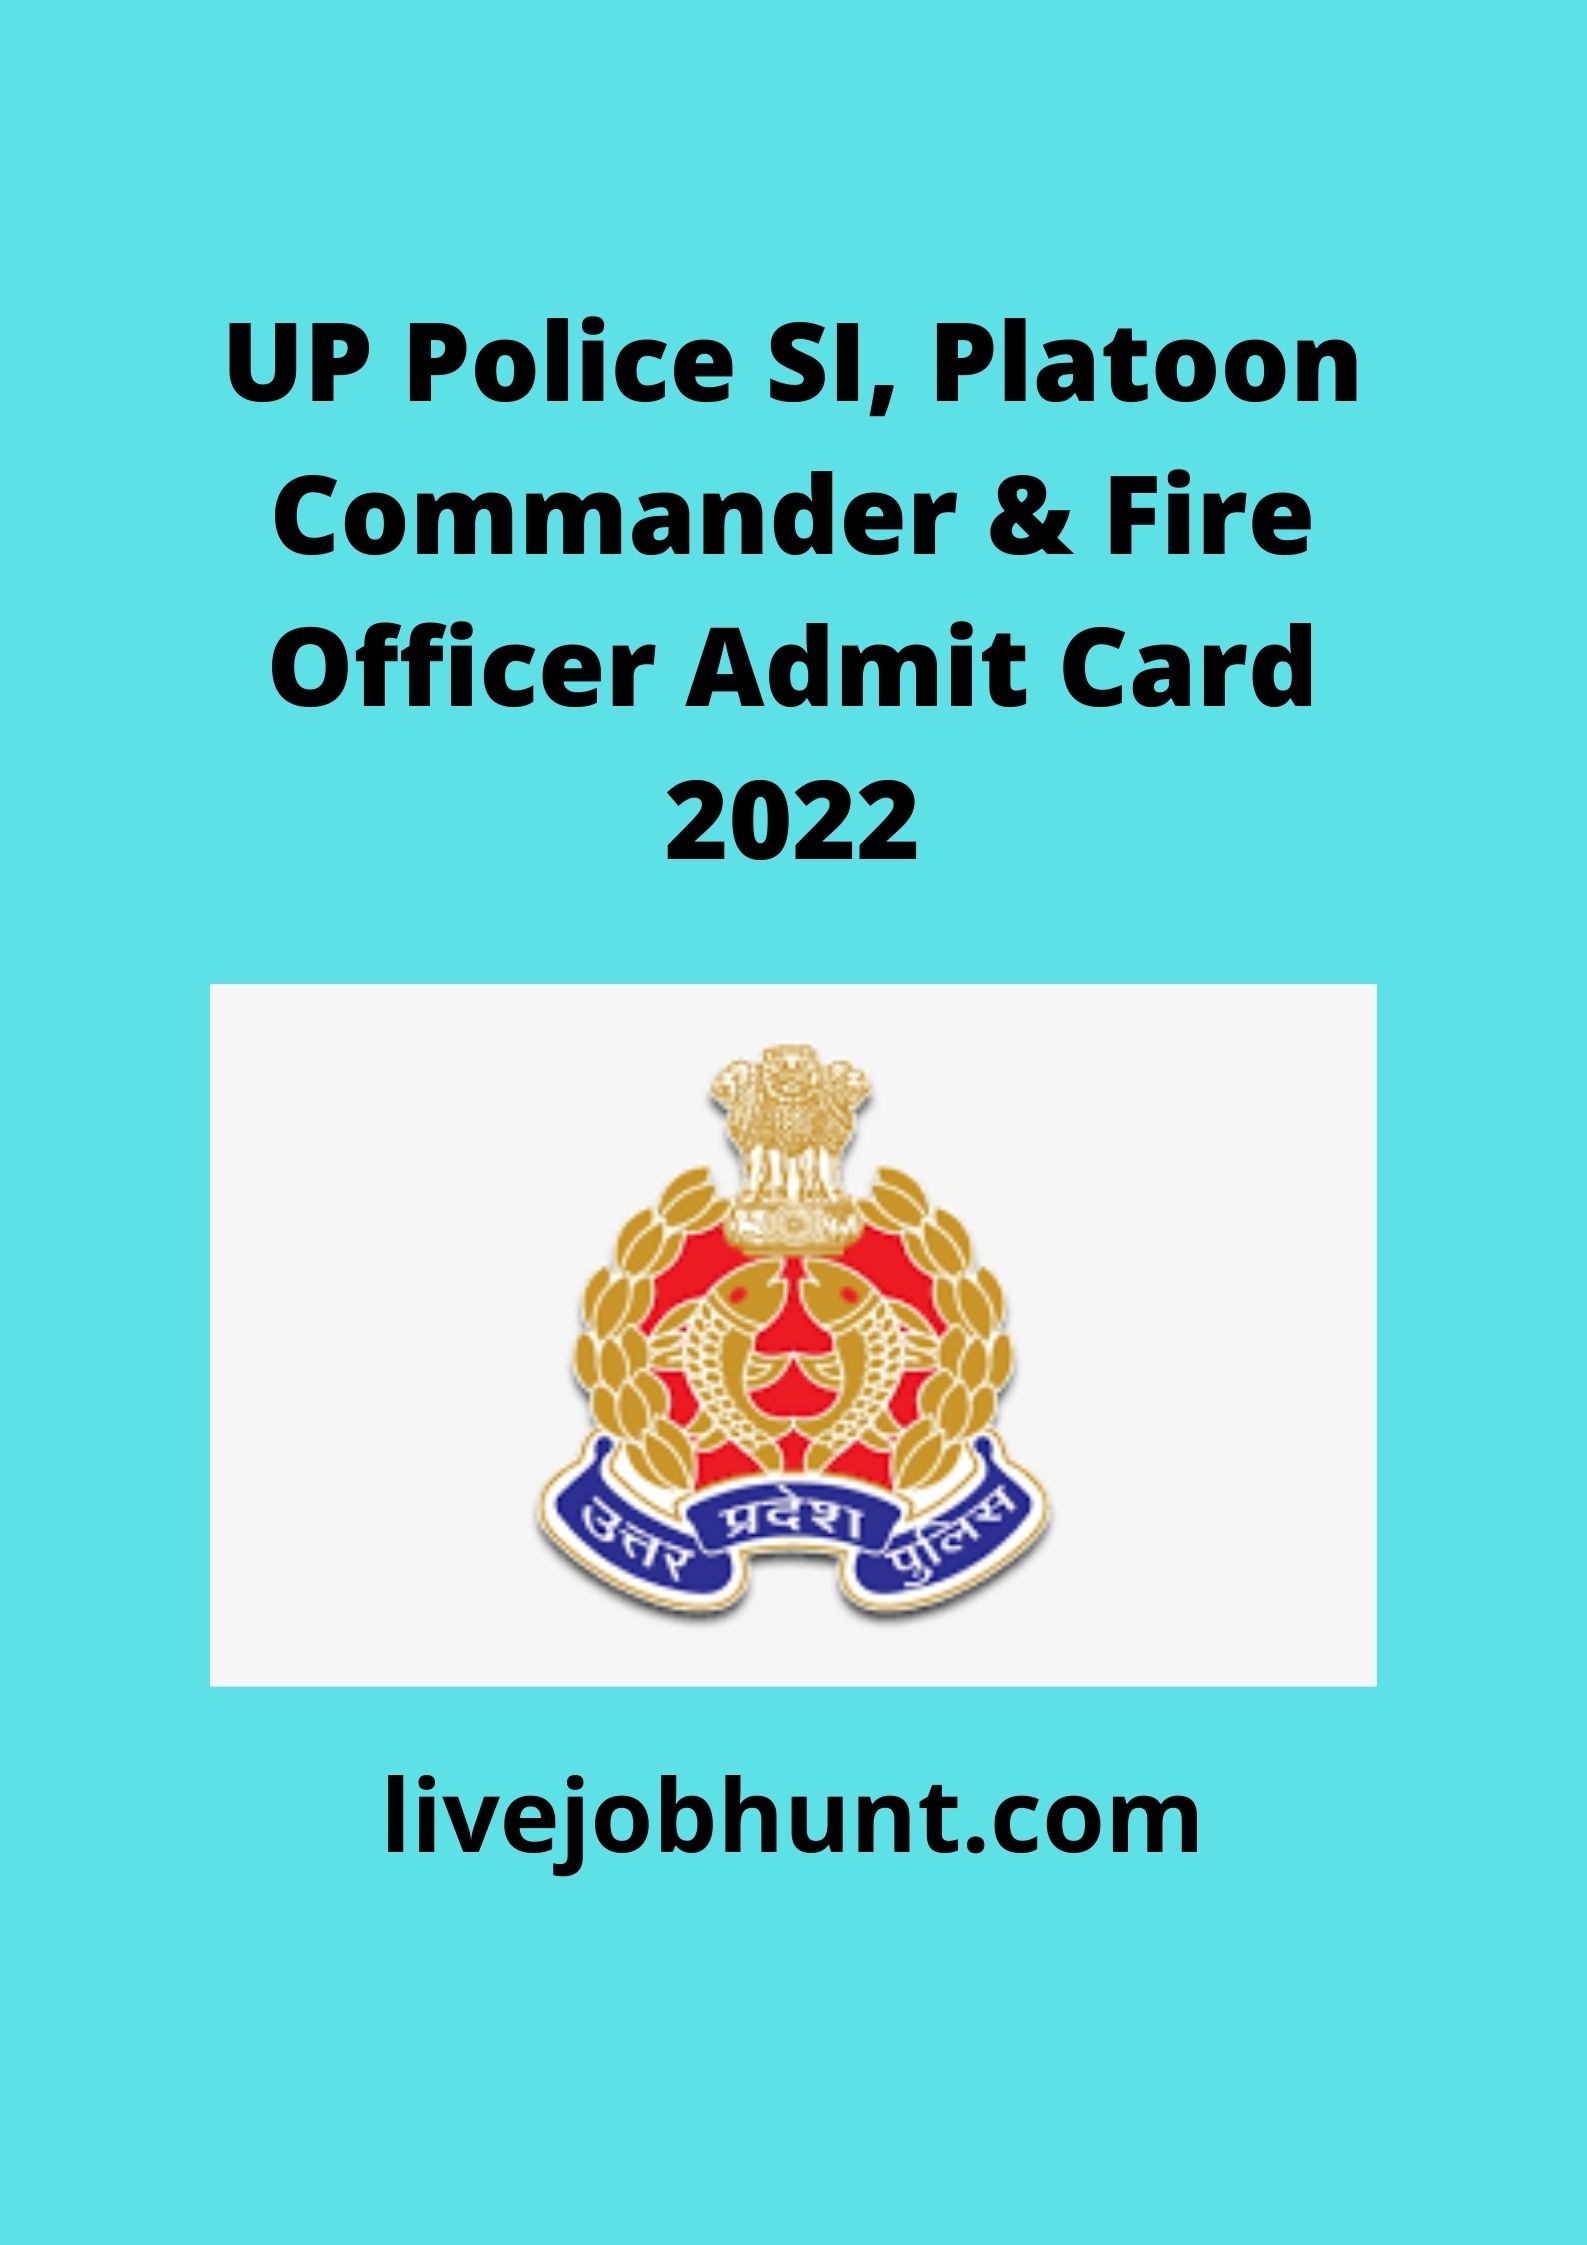 up police si, platoon commander & fire officer admit card 2022